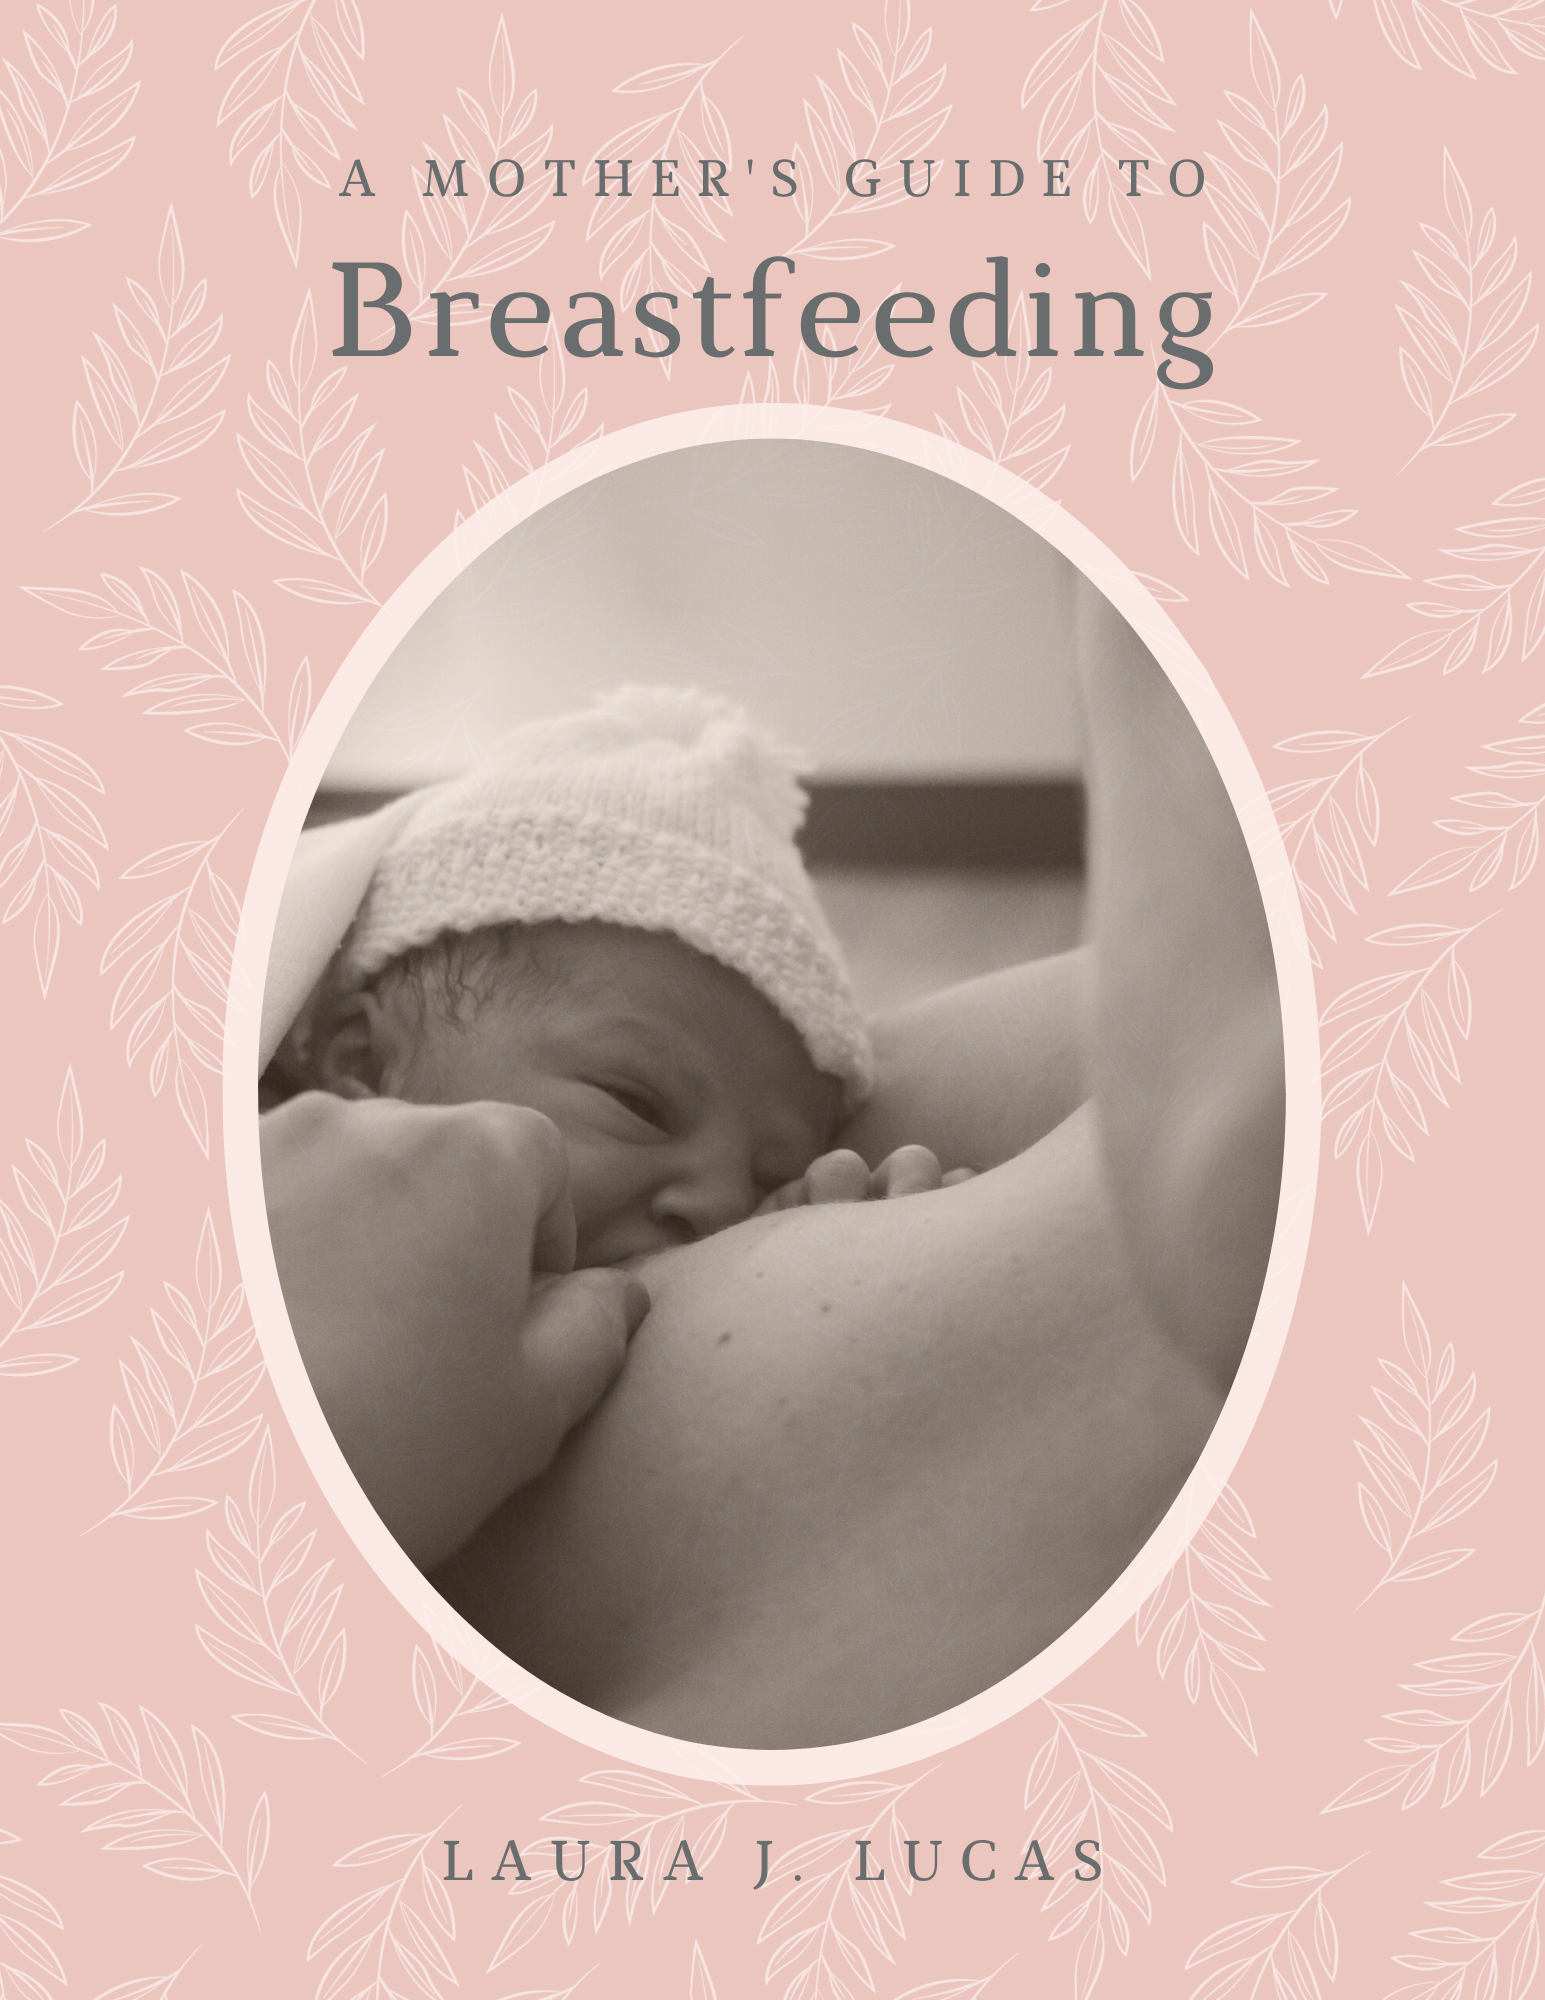 A Mama's Guide to Breastfeeding Essentials – My Merry Messy Life